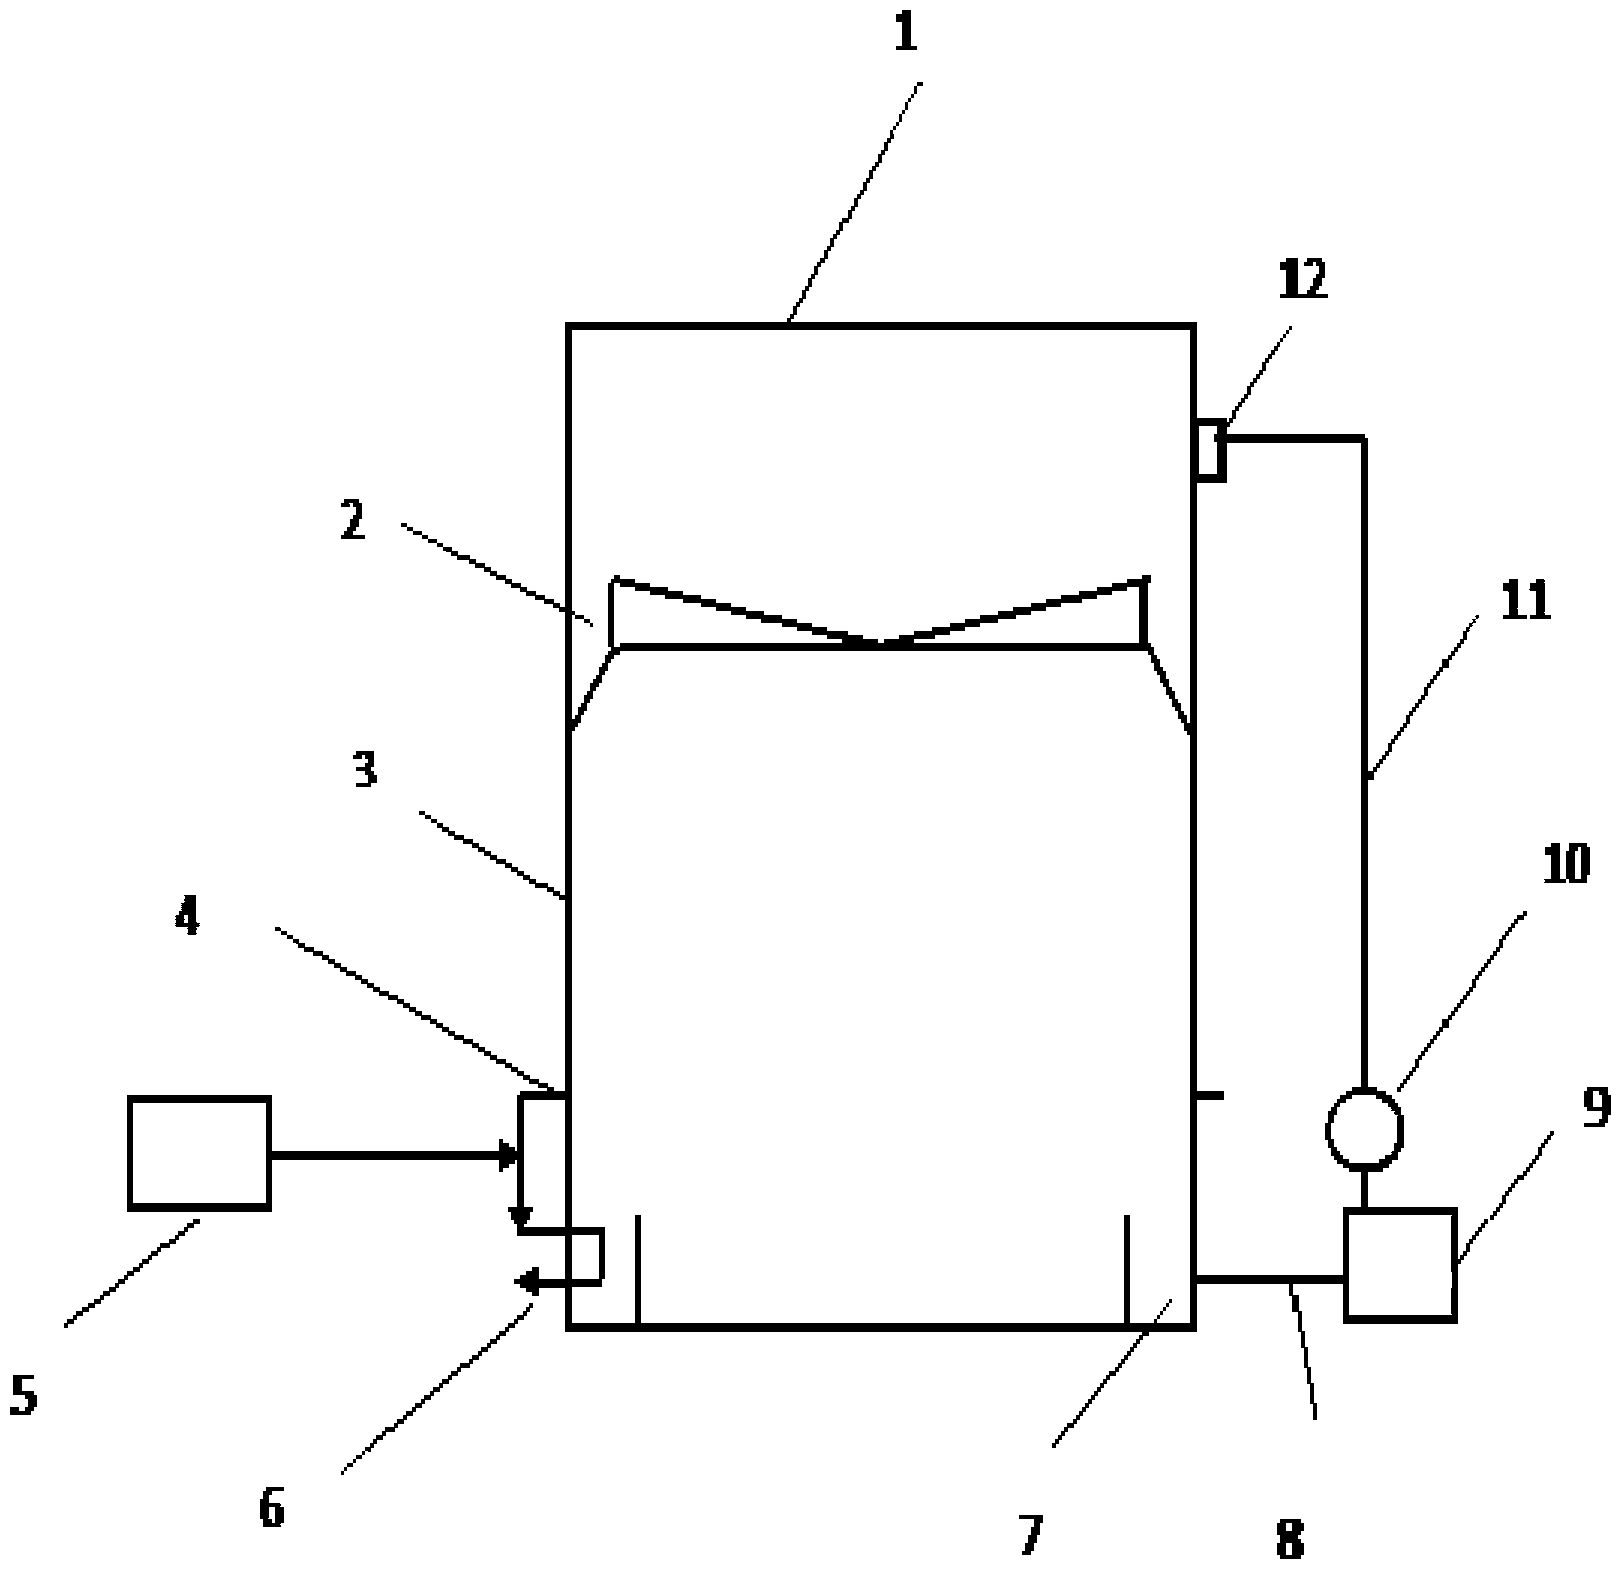 Regenerated sealing oil composition and gas holder using same